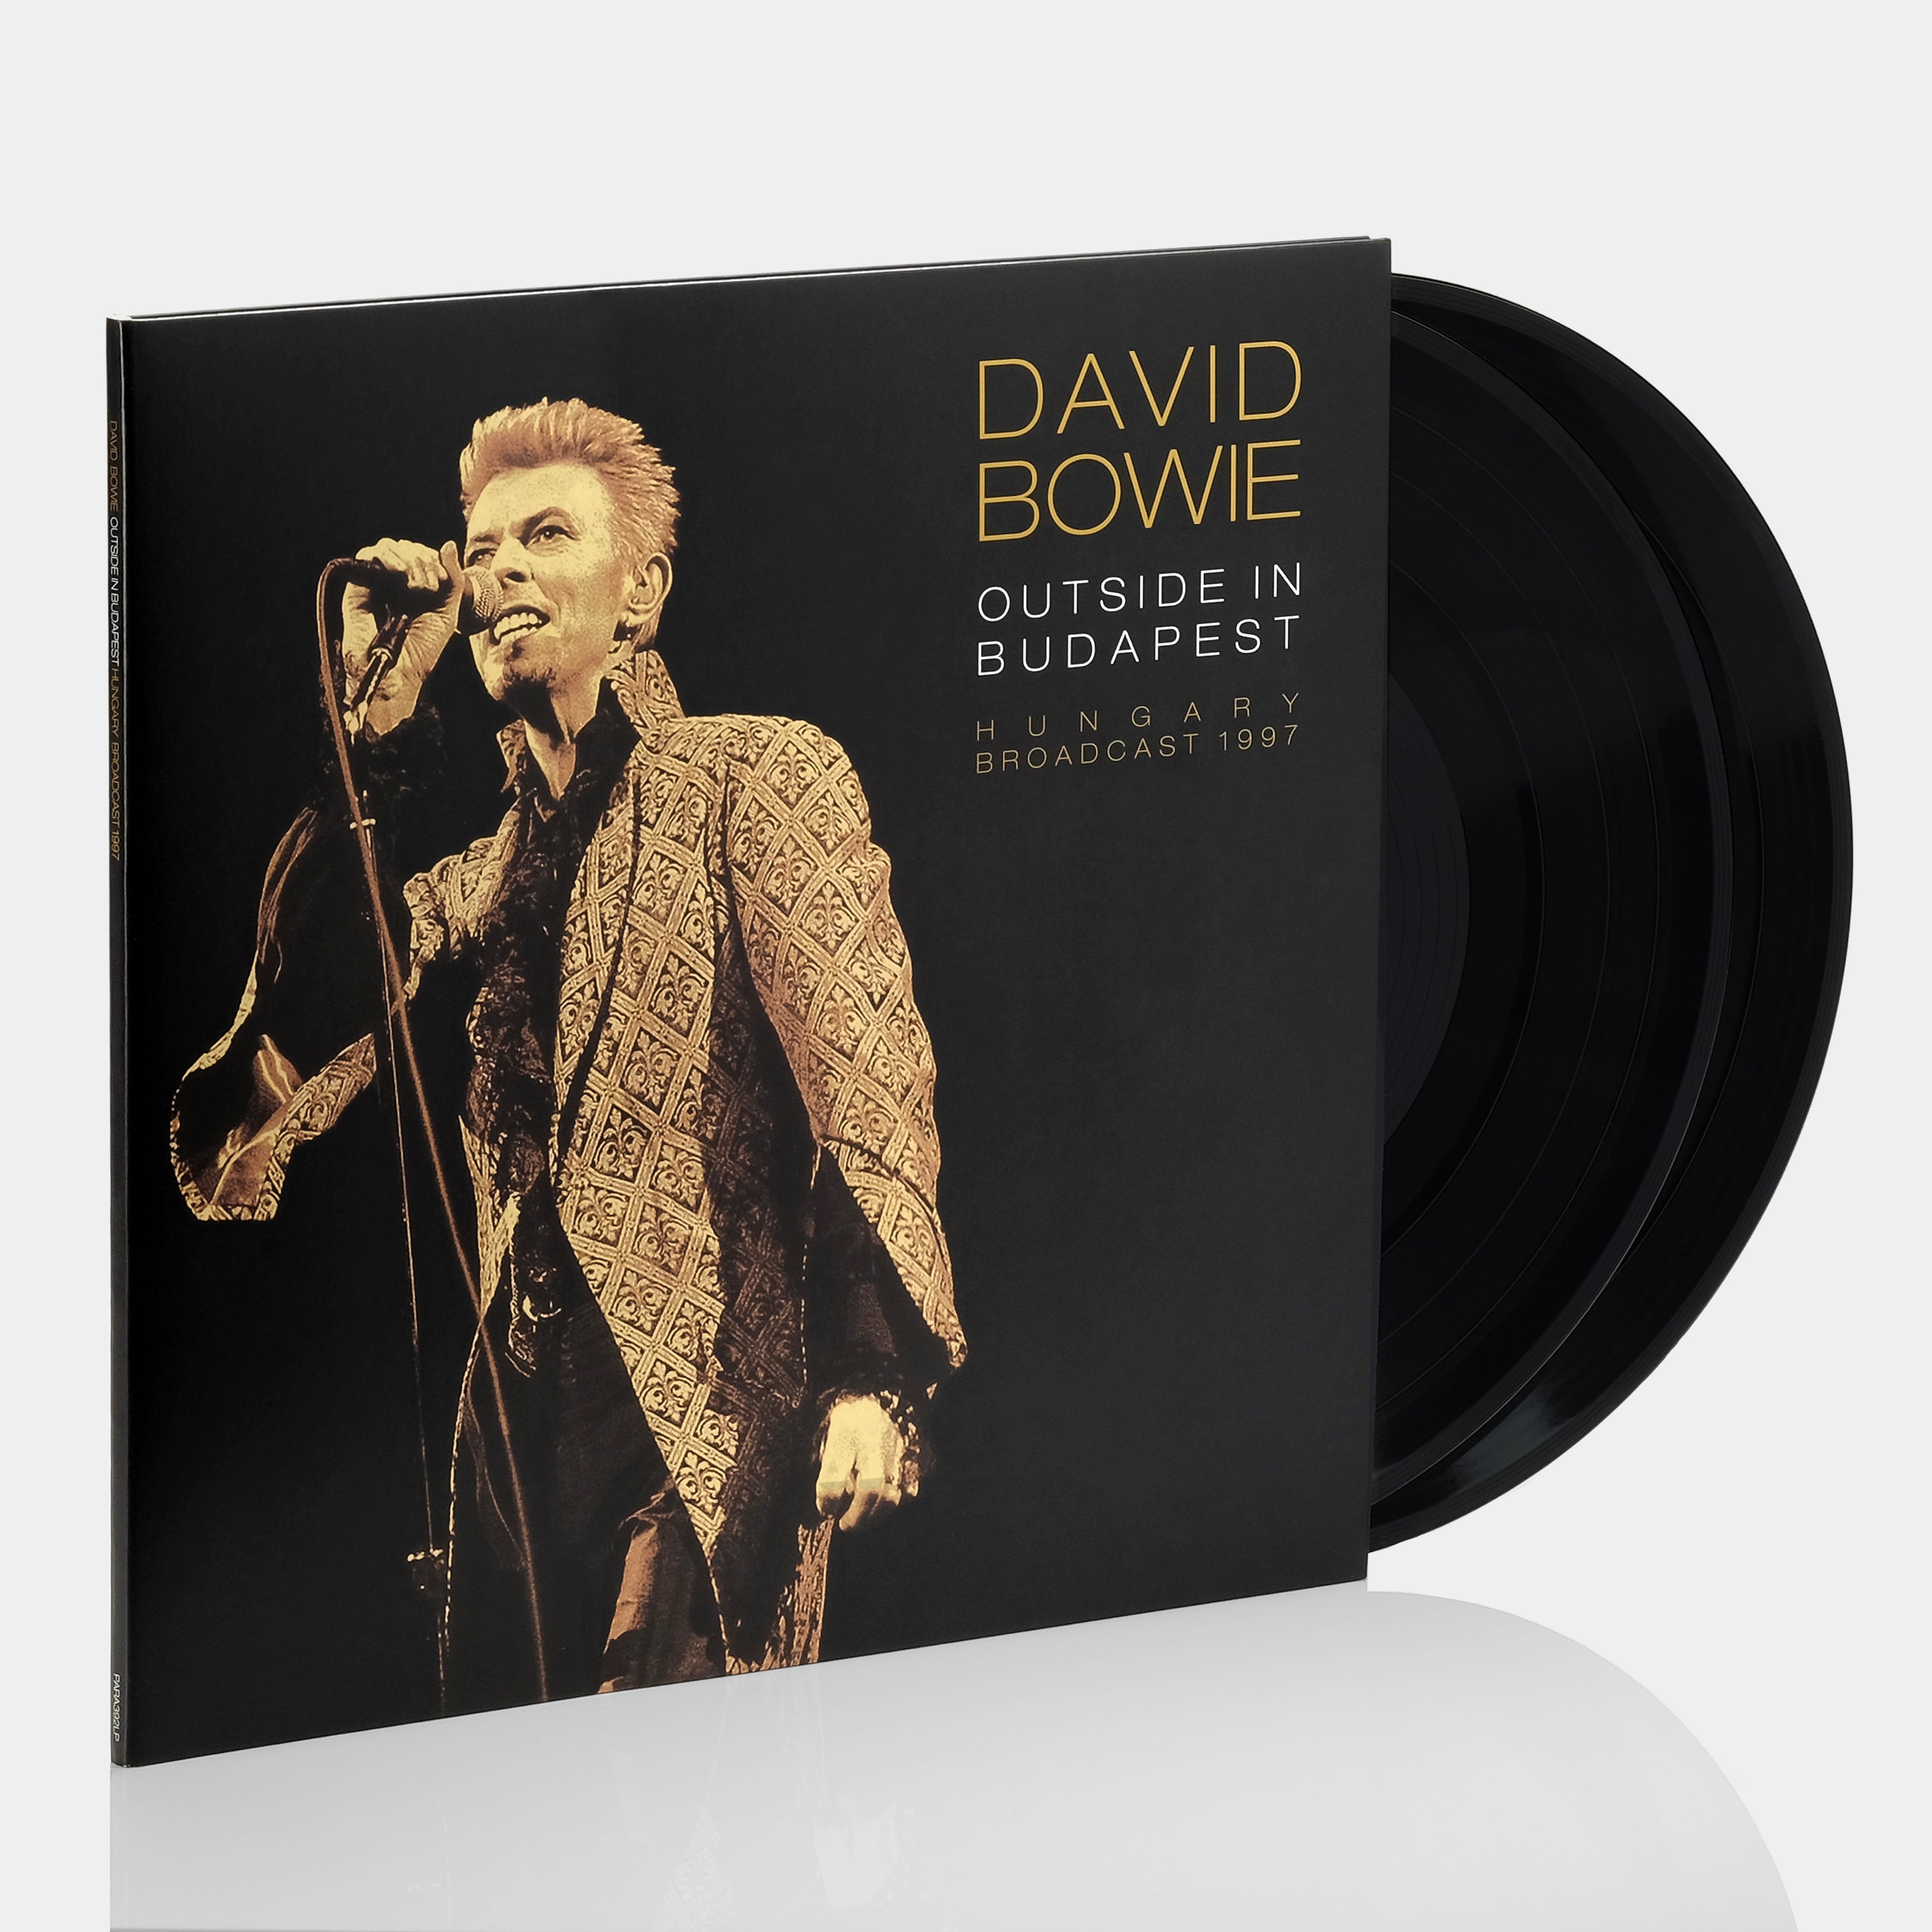 David Bowie - Outside in Budapest Hungary Broadcast 1997 2xLP Vinyl Record